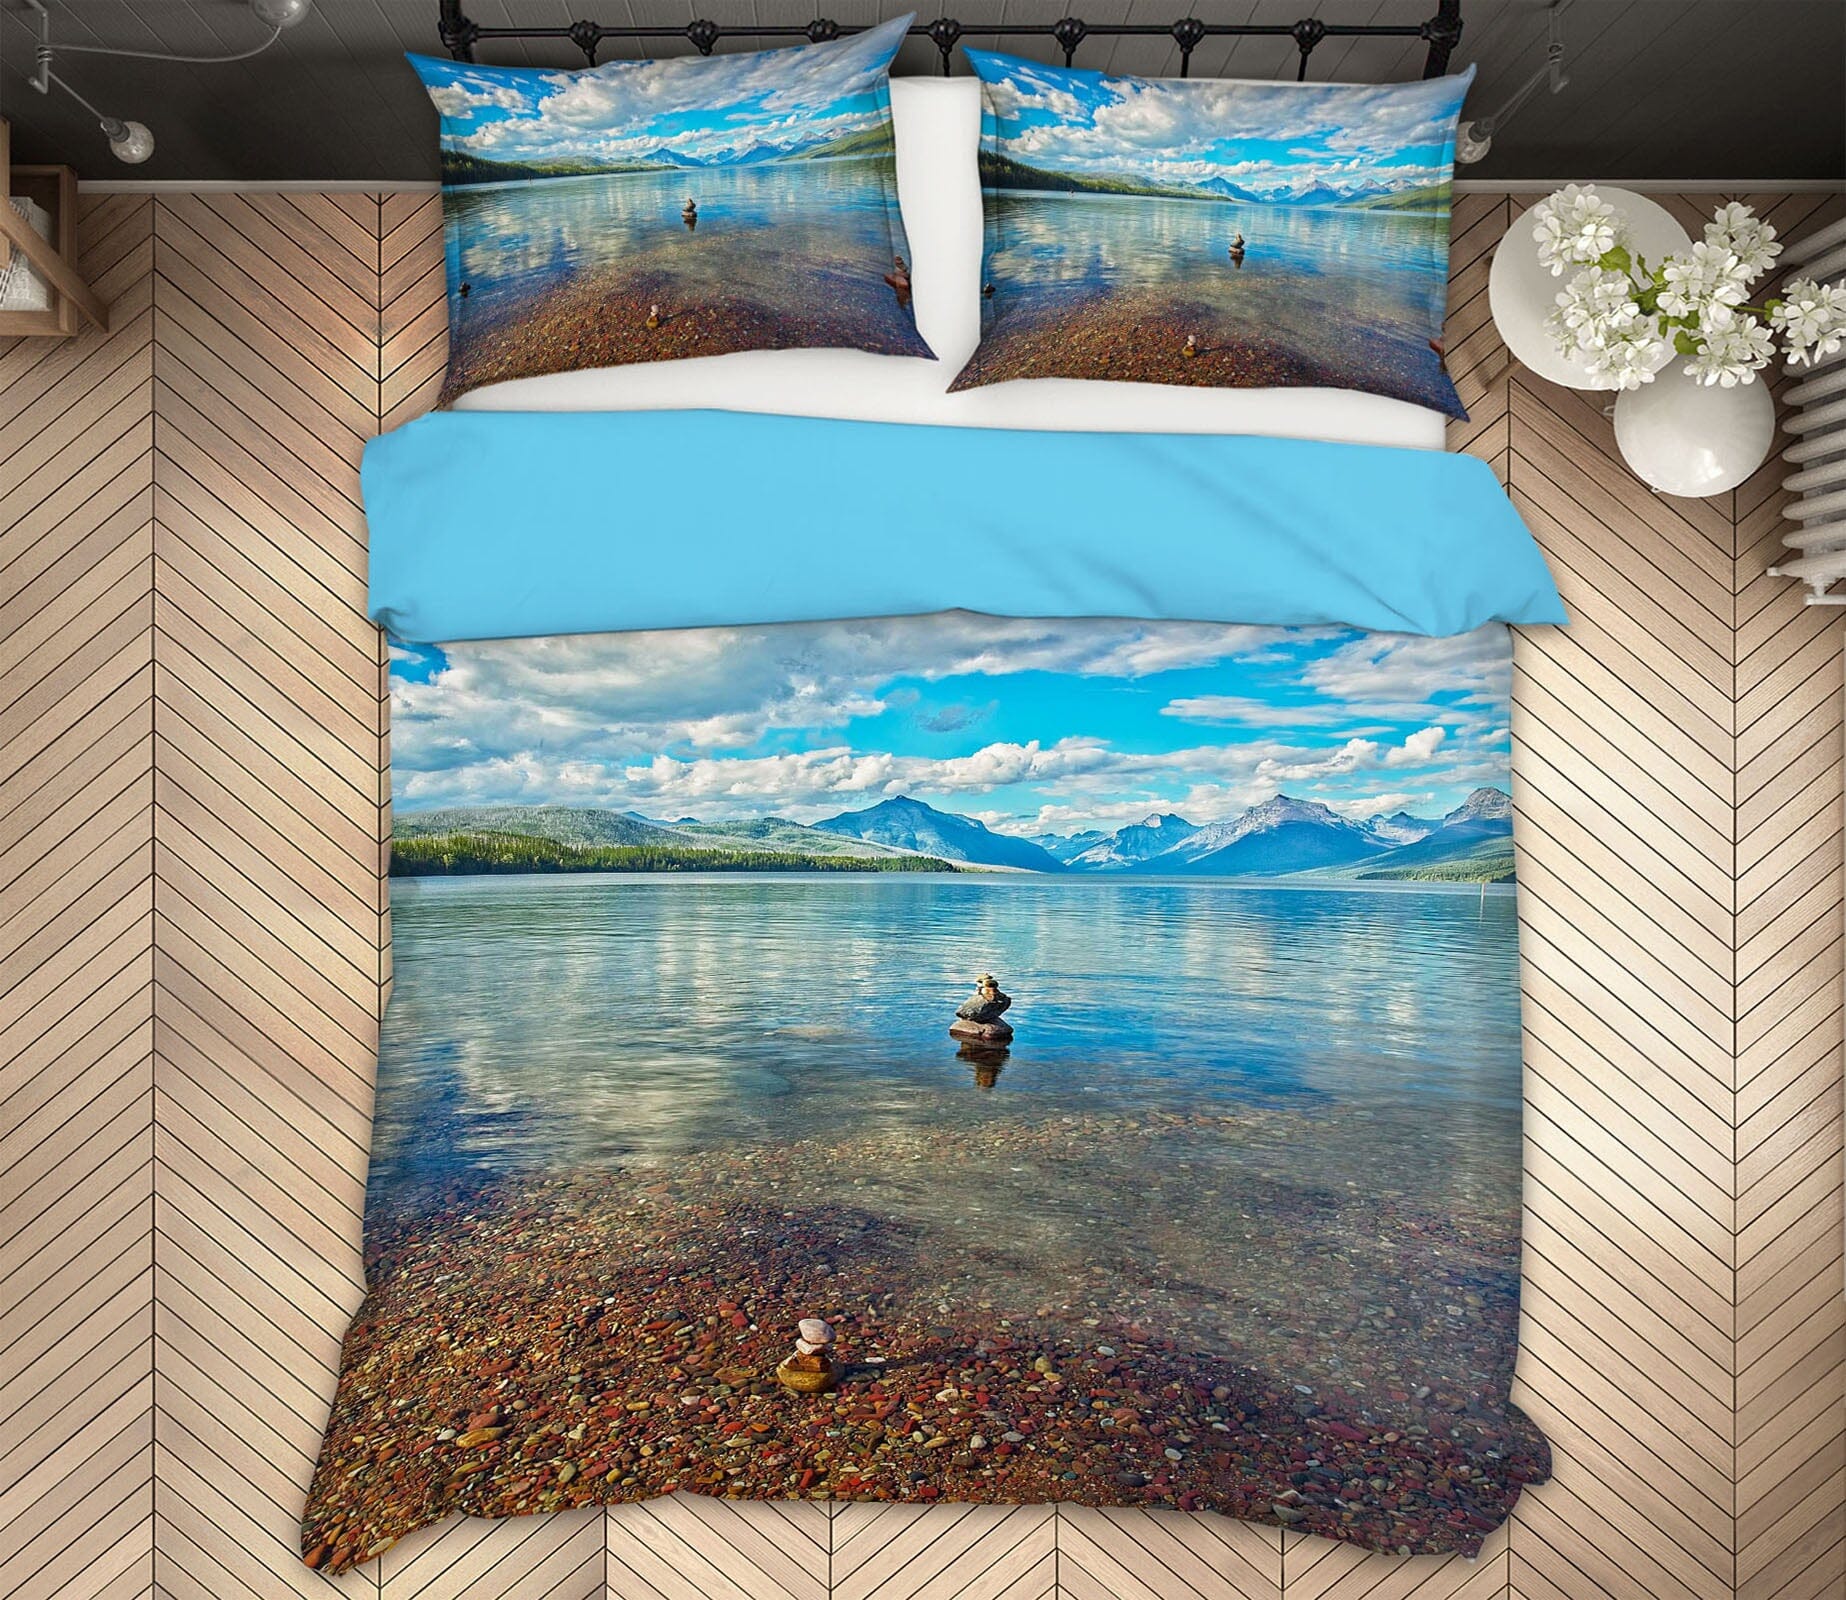 3D Clear Lake 2124 Kathy Barefield Bedding Bed Pillowcases Quilt Quiet Covers AJ Creativity Home 